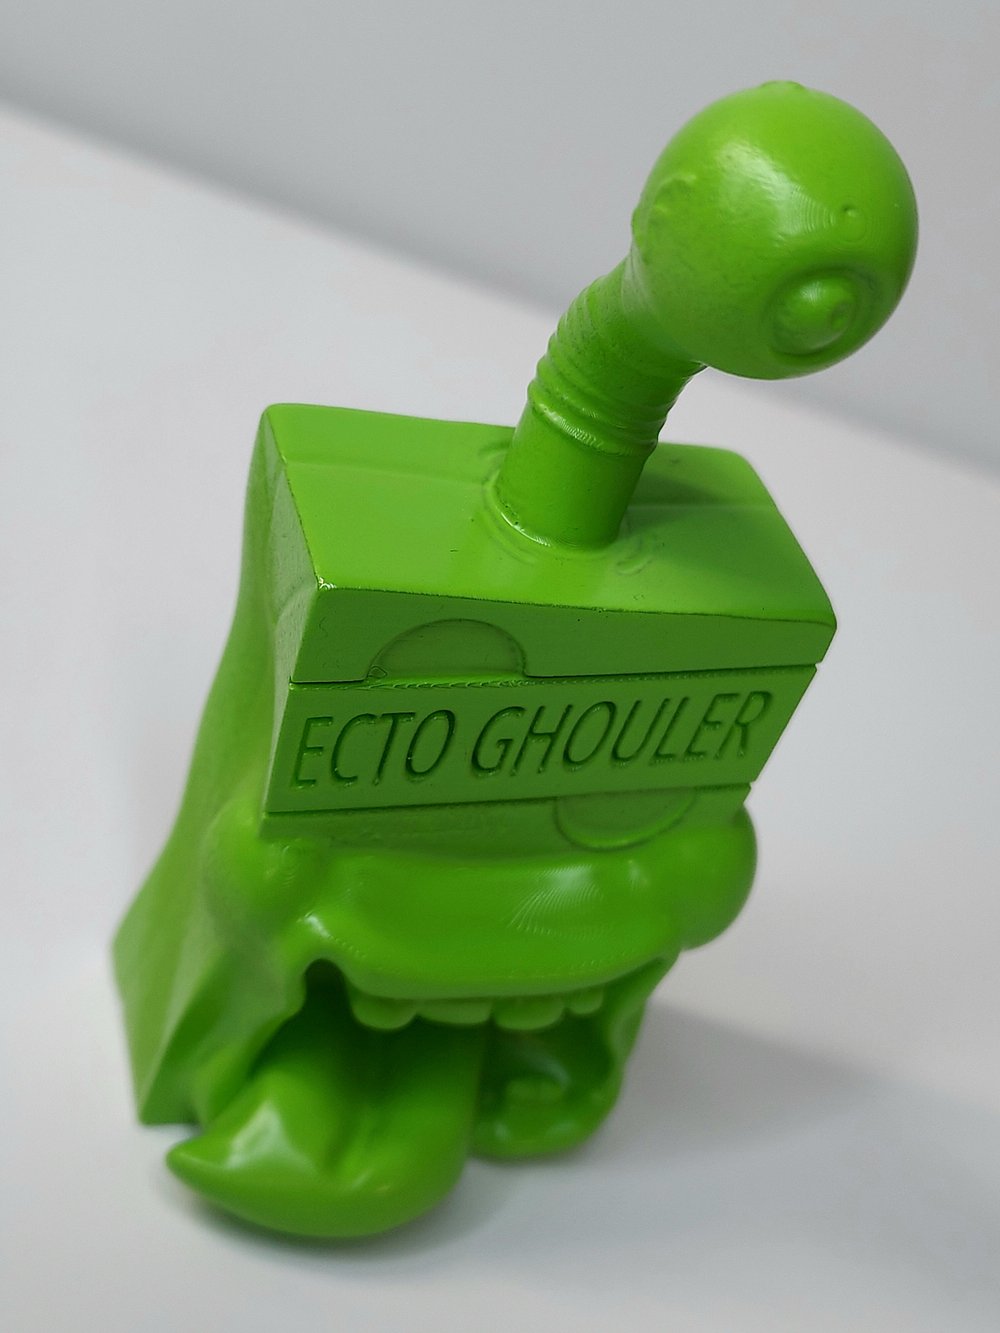 Crypt Creepers Ecto Ghouler